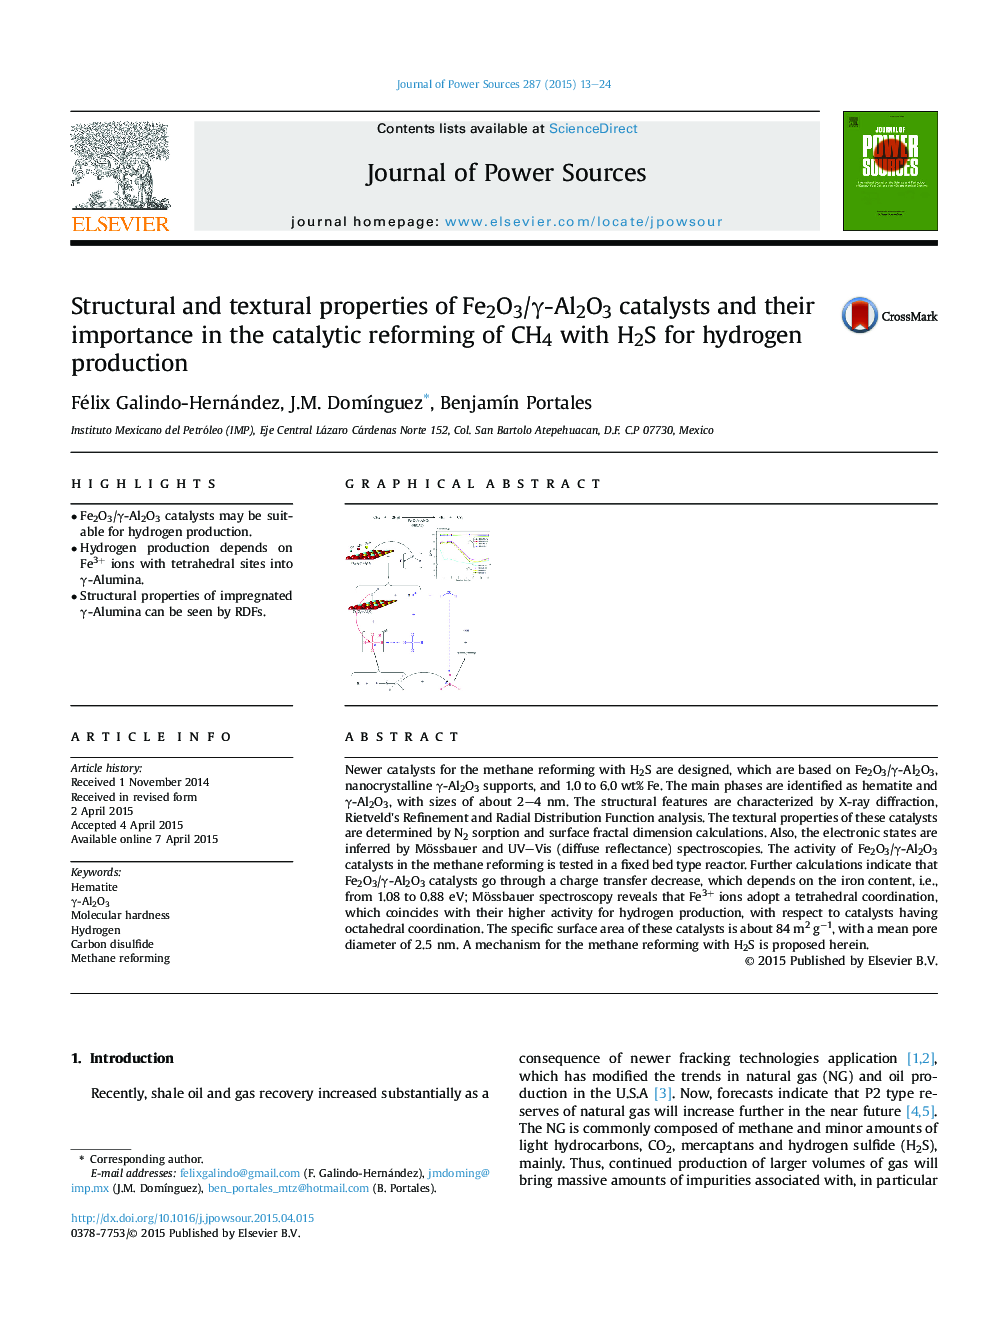 Structural and textural properties of Fe2O3/Î³-Al2O3 catalysts and their importance in the catalytic reforming of CH4 with H2S for hydrogen production